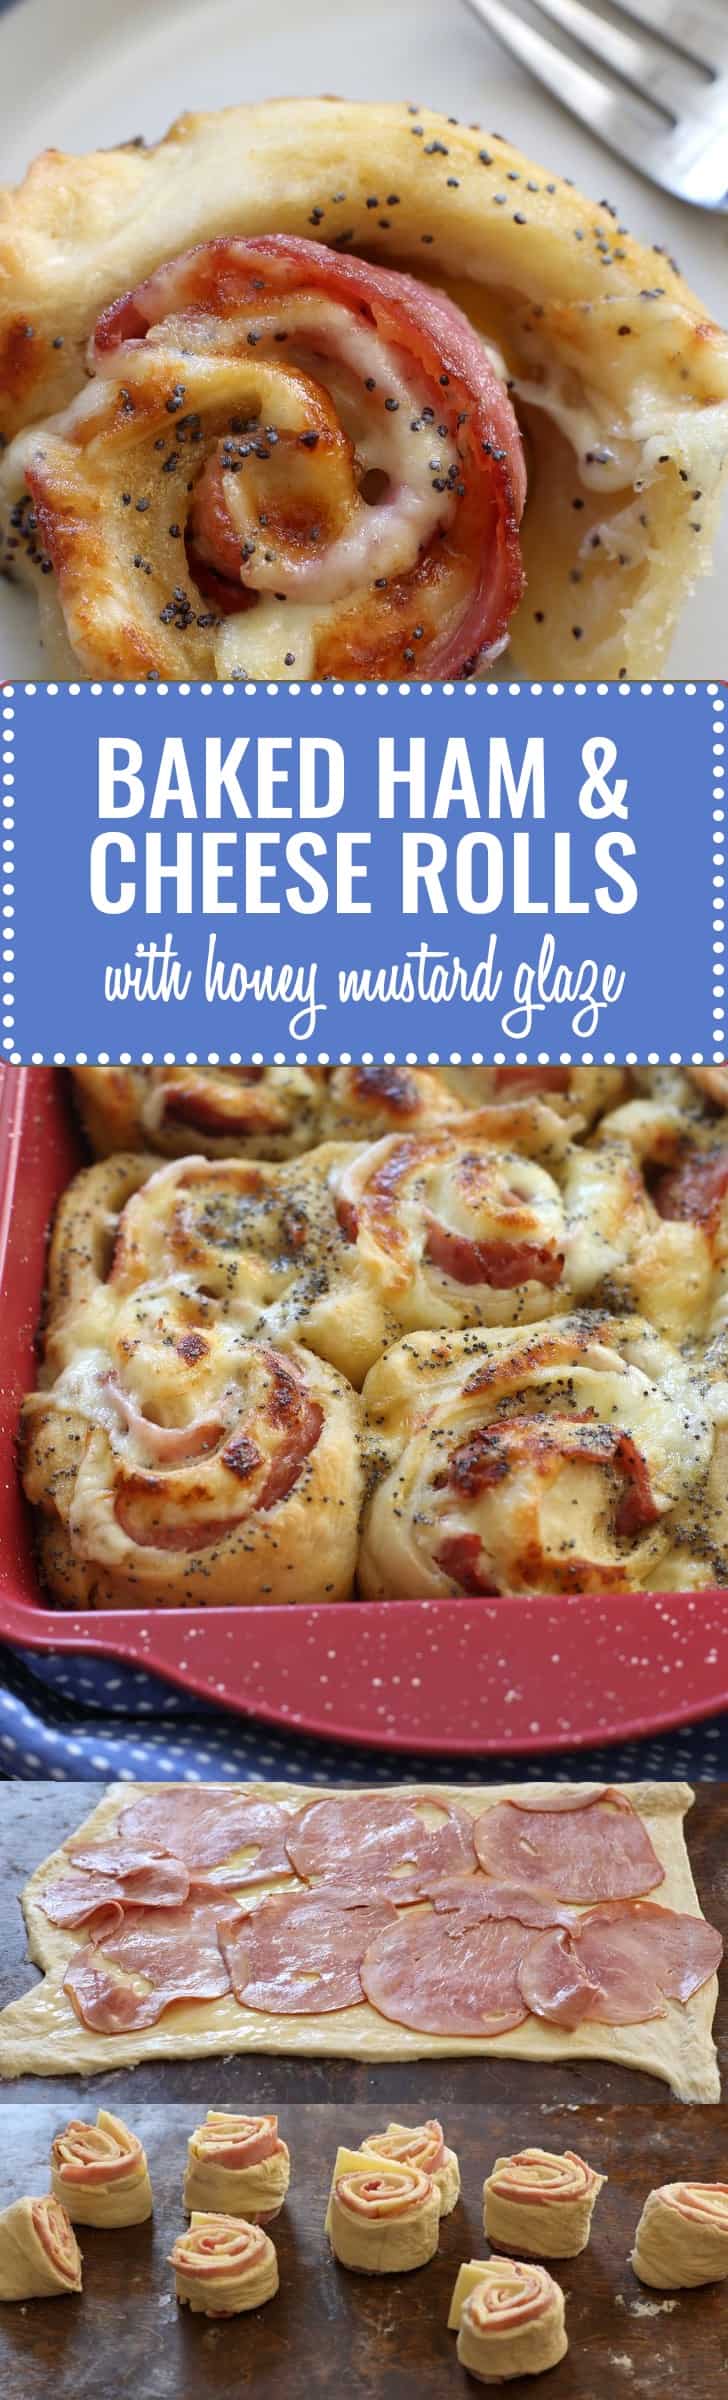 Baked Ham and Cheese Rolls with Honey Mustard Glaze - Classic ham and cheese sandwiches meet Stromboli in these baked rolls made with pizza dough and finished with honey mustard poppy seed glaze. A crowd-pleaser for kids and adults.